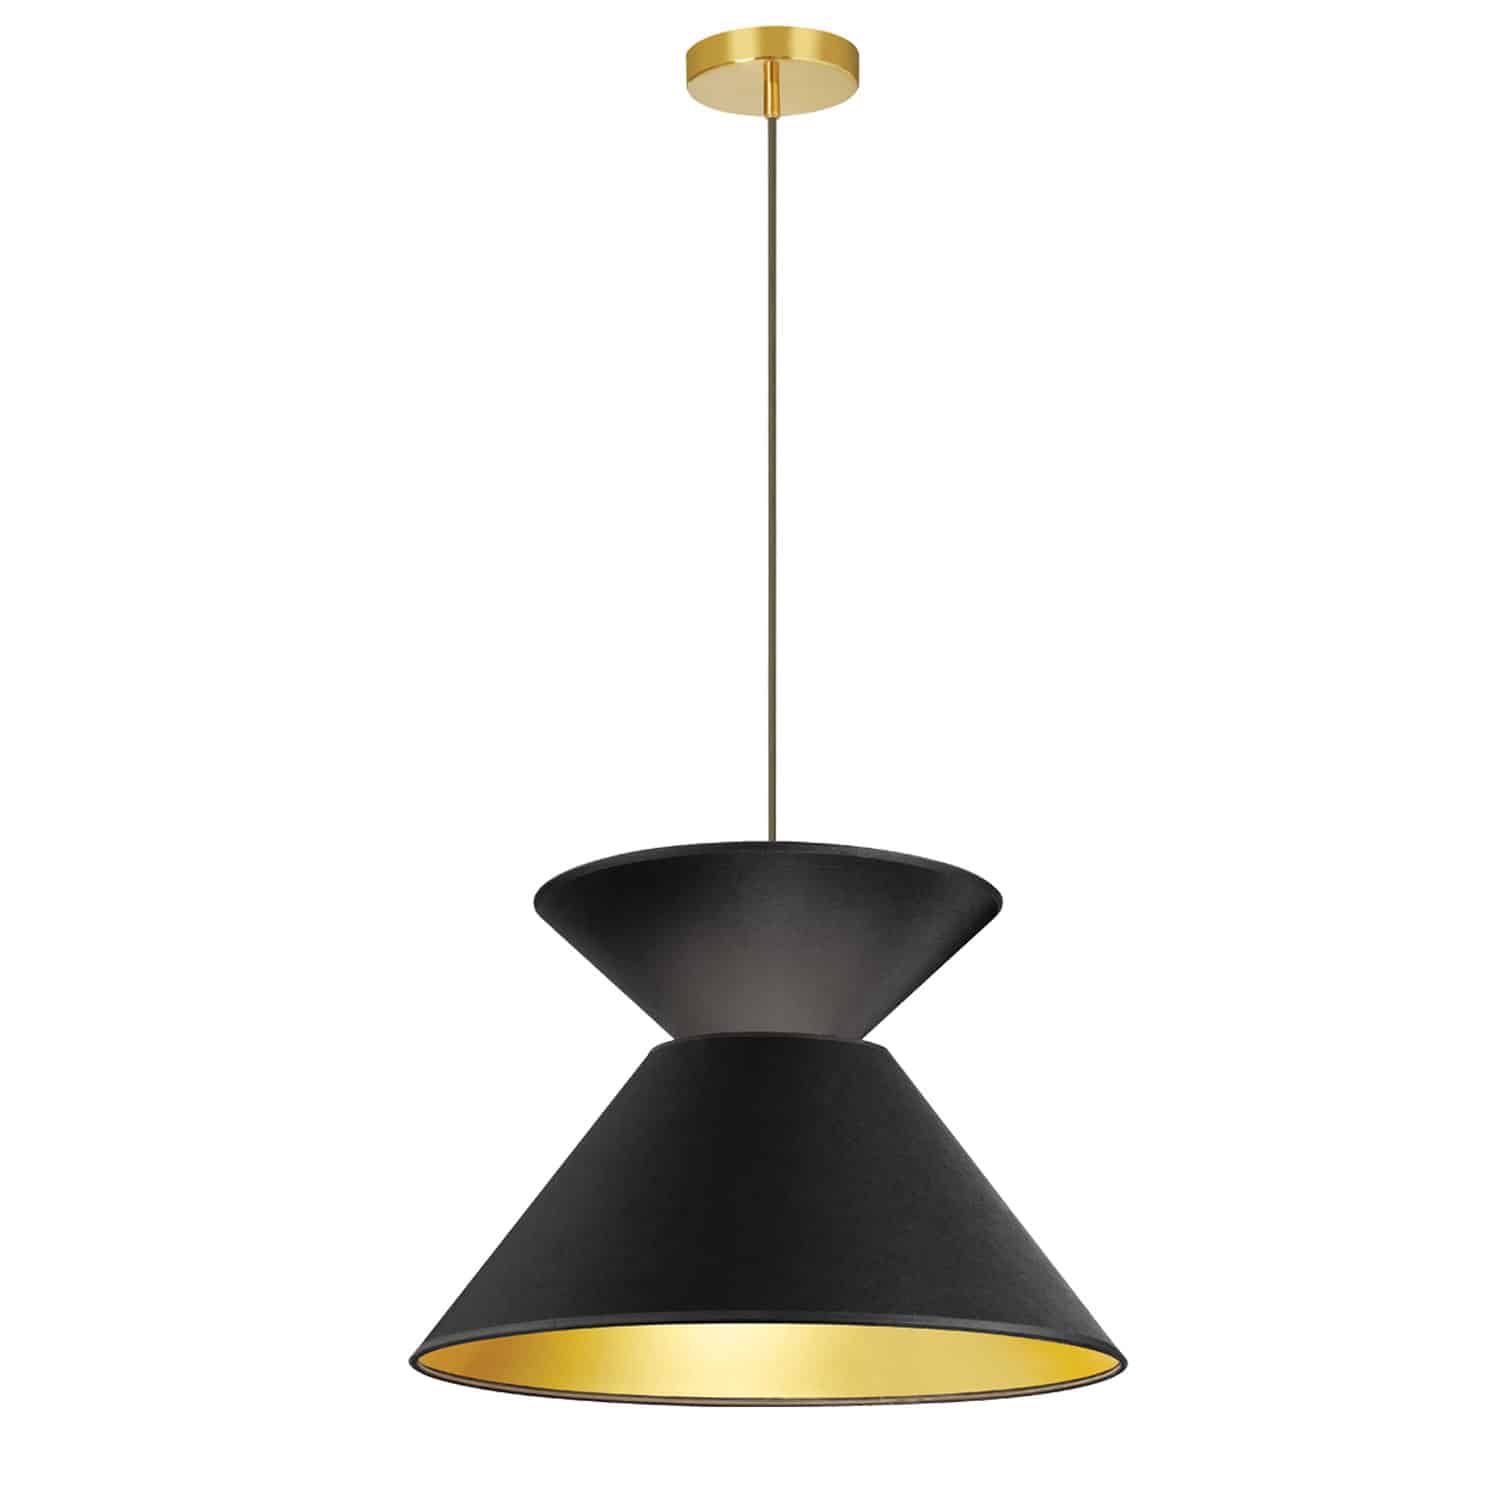 1 Light Patricia Pendant, Aged Brass with Black/Gold Shade